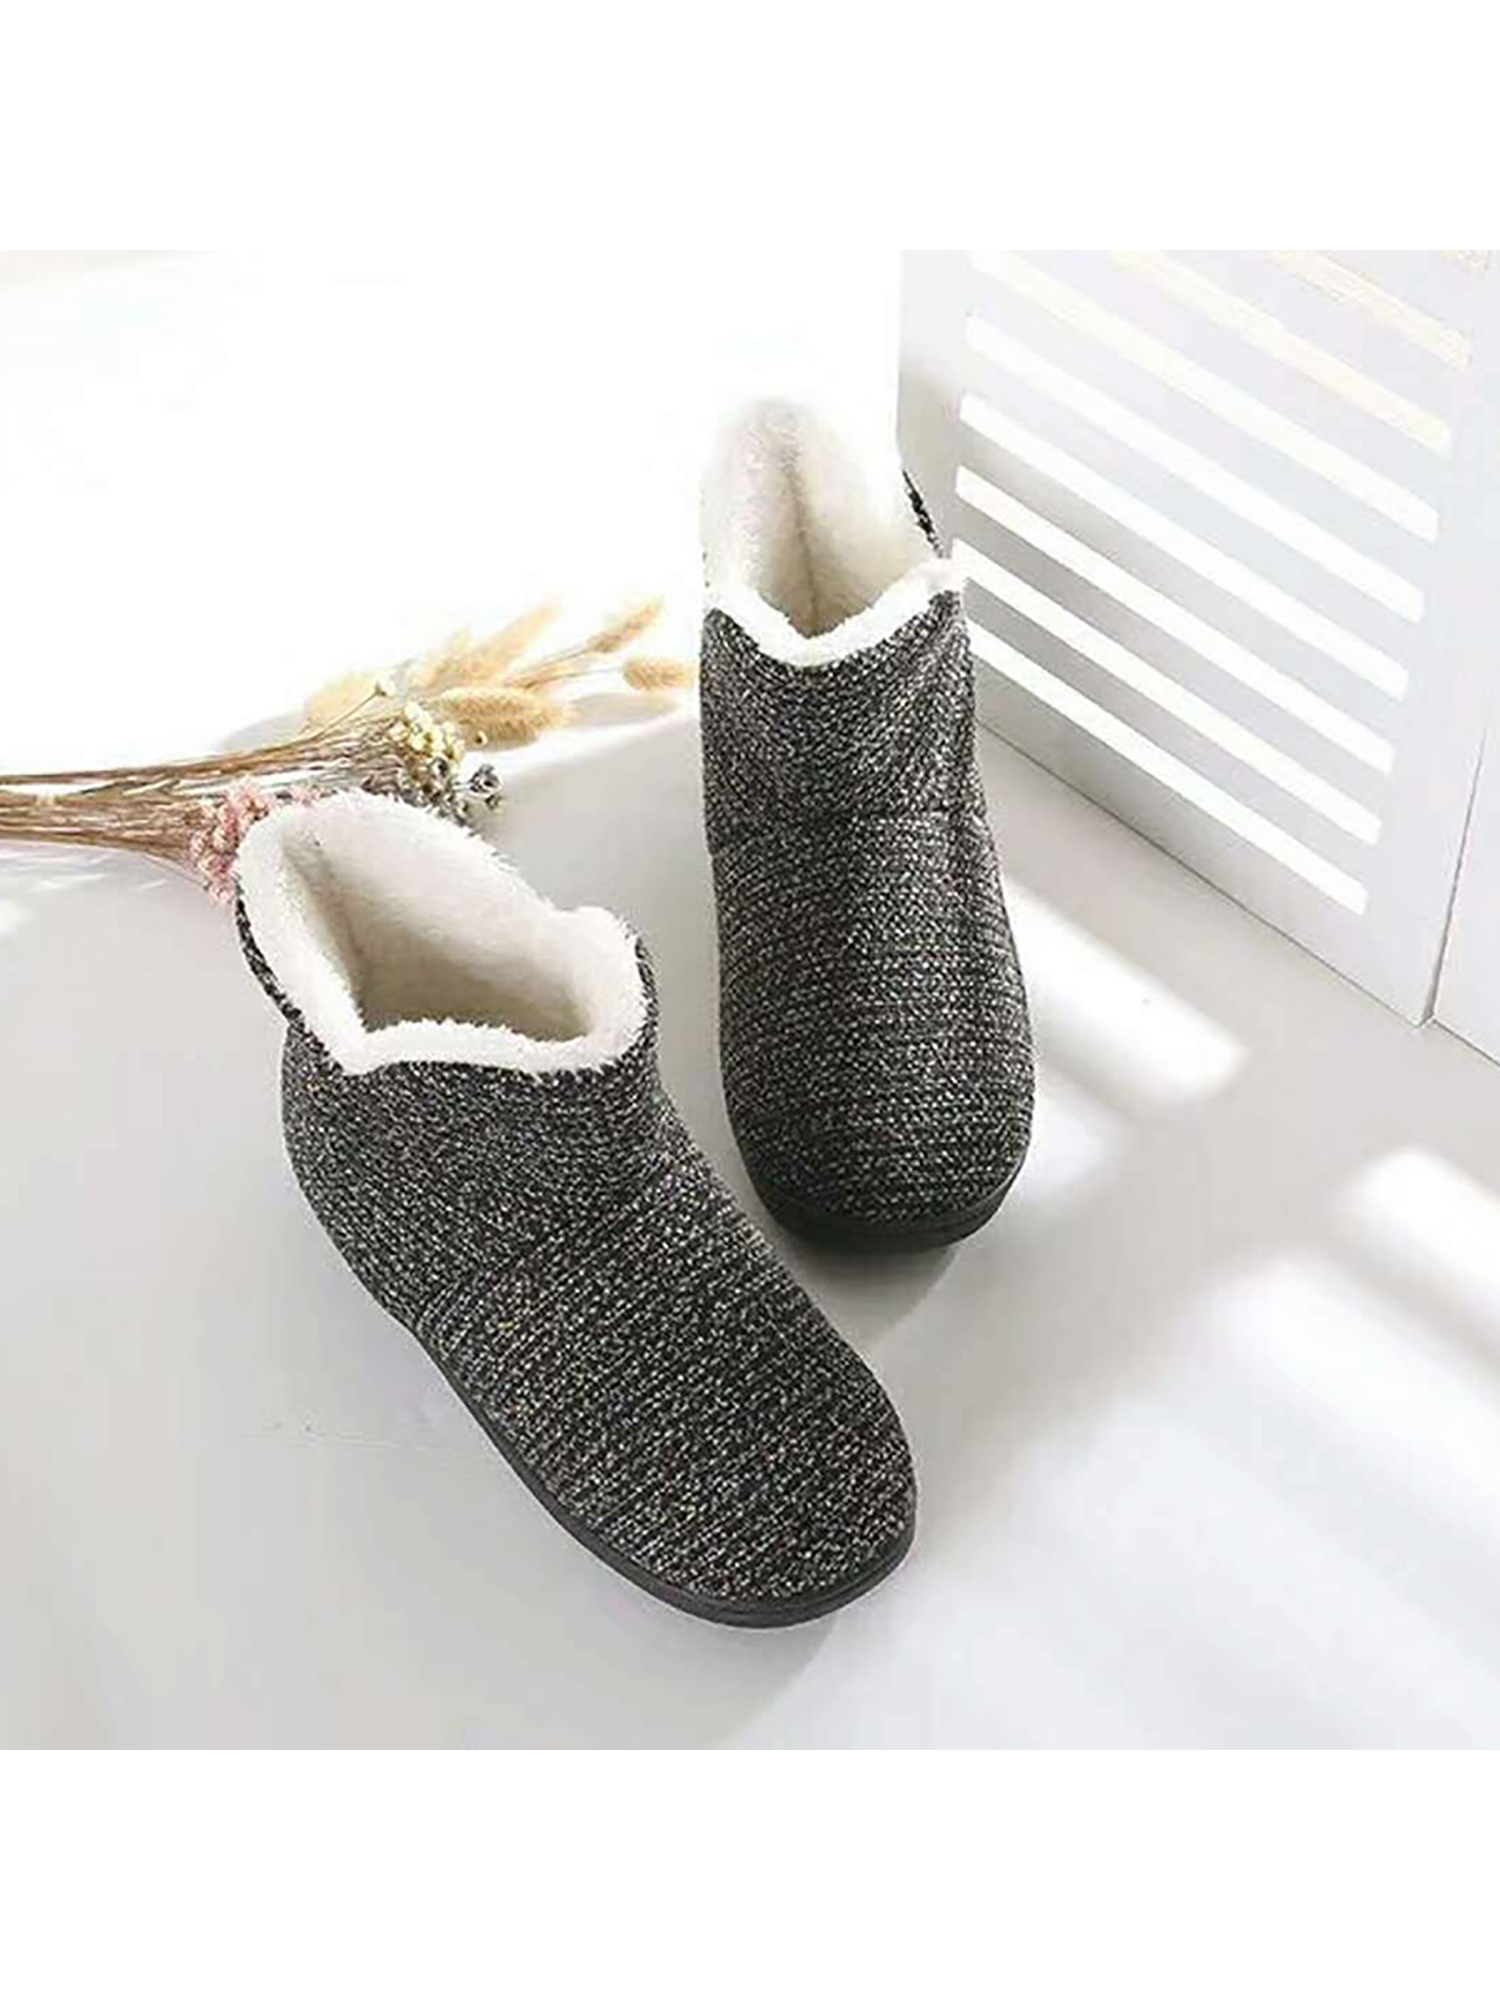 UKAP Womens Color Stitching Slippers Bootie Winter Warm Boots House ...